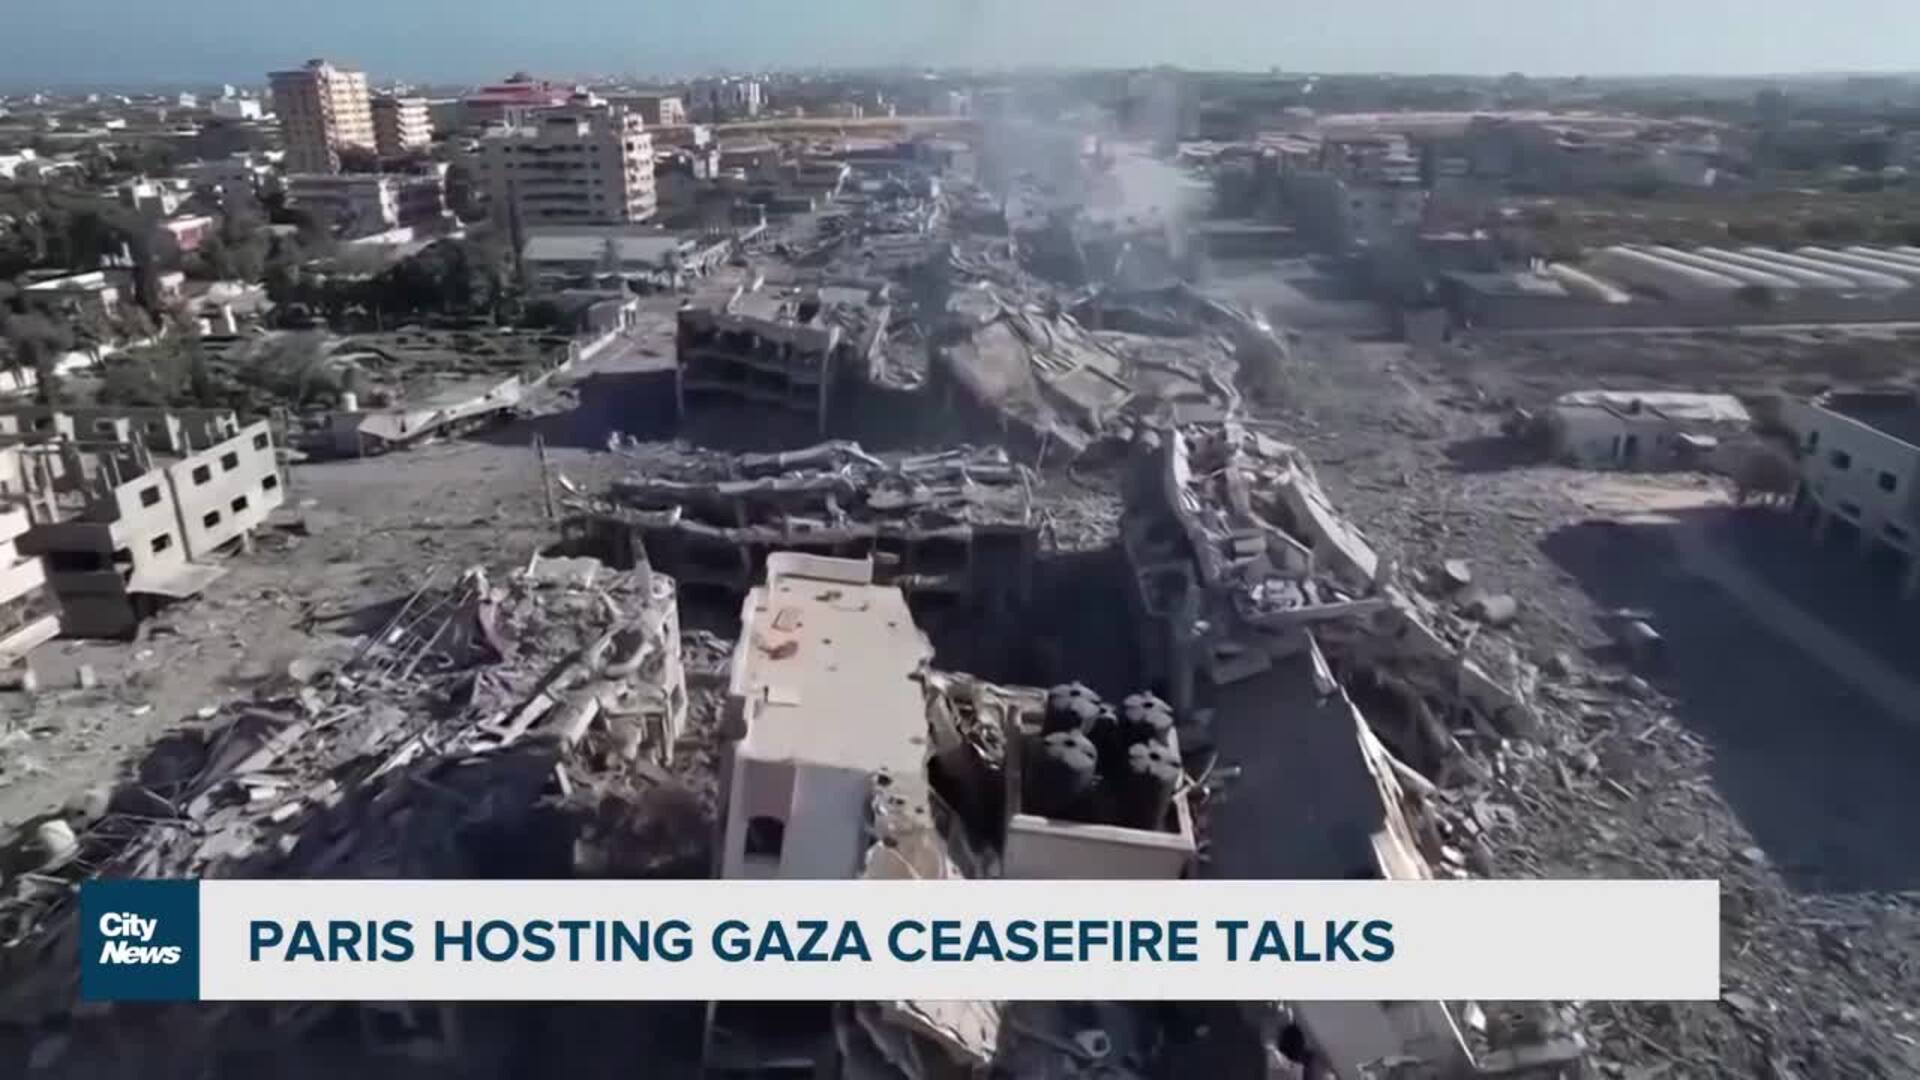 Will a breakthrough in Gaza ceasefire talks come this weekend?